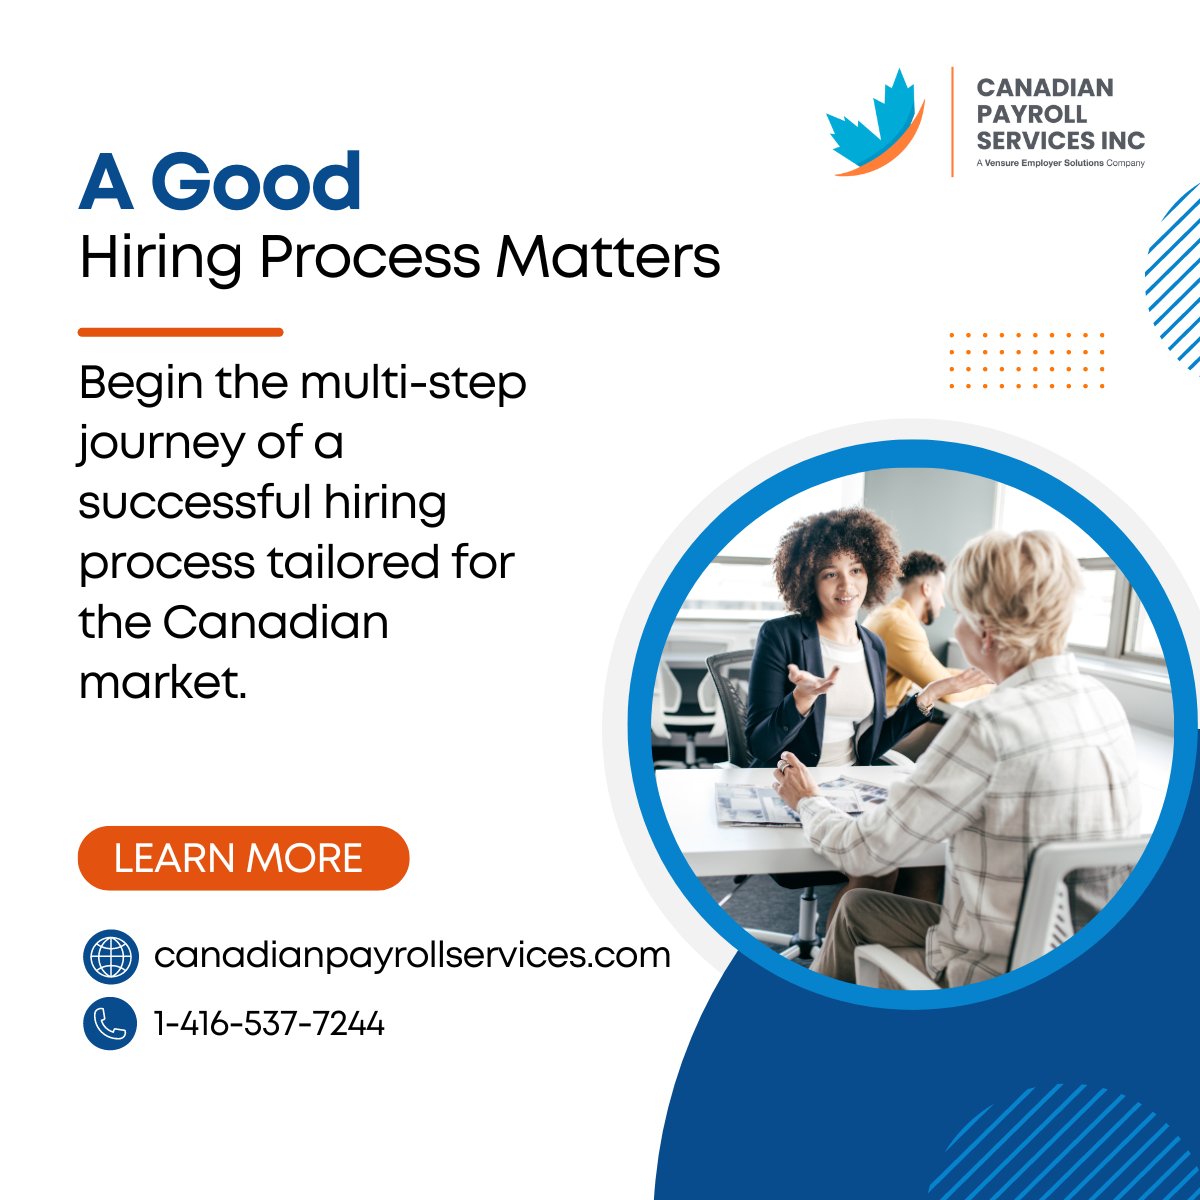 📝 Define job requirements, search effectively, and comply with Canadian hiring rules. Learn the steps to a successful hiring process tailored for Canada.
🔗 Learn more: canadianpayrollservices.com/hr-best-practi…
#HiringProcess #Recruitment #CanadianJobs